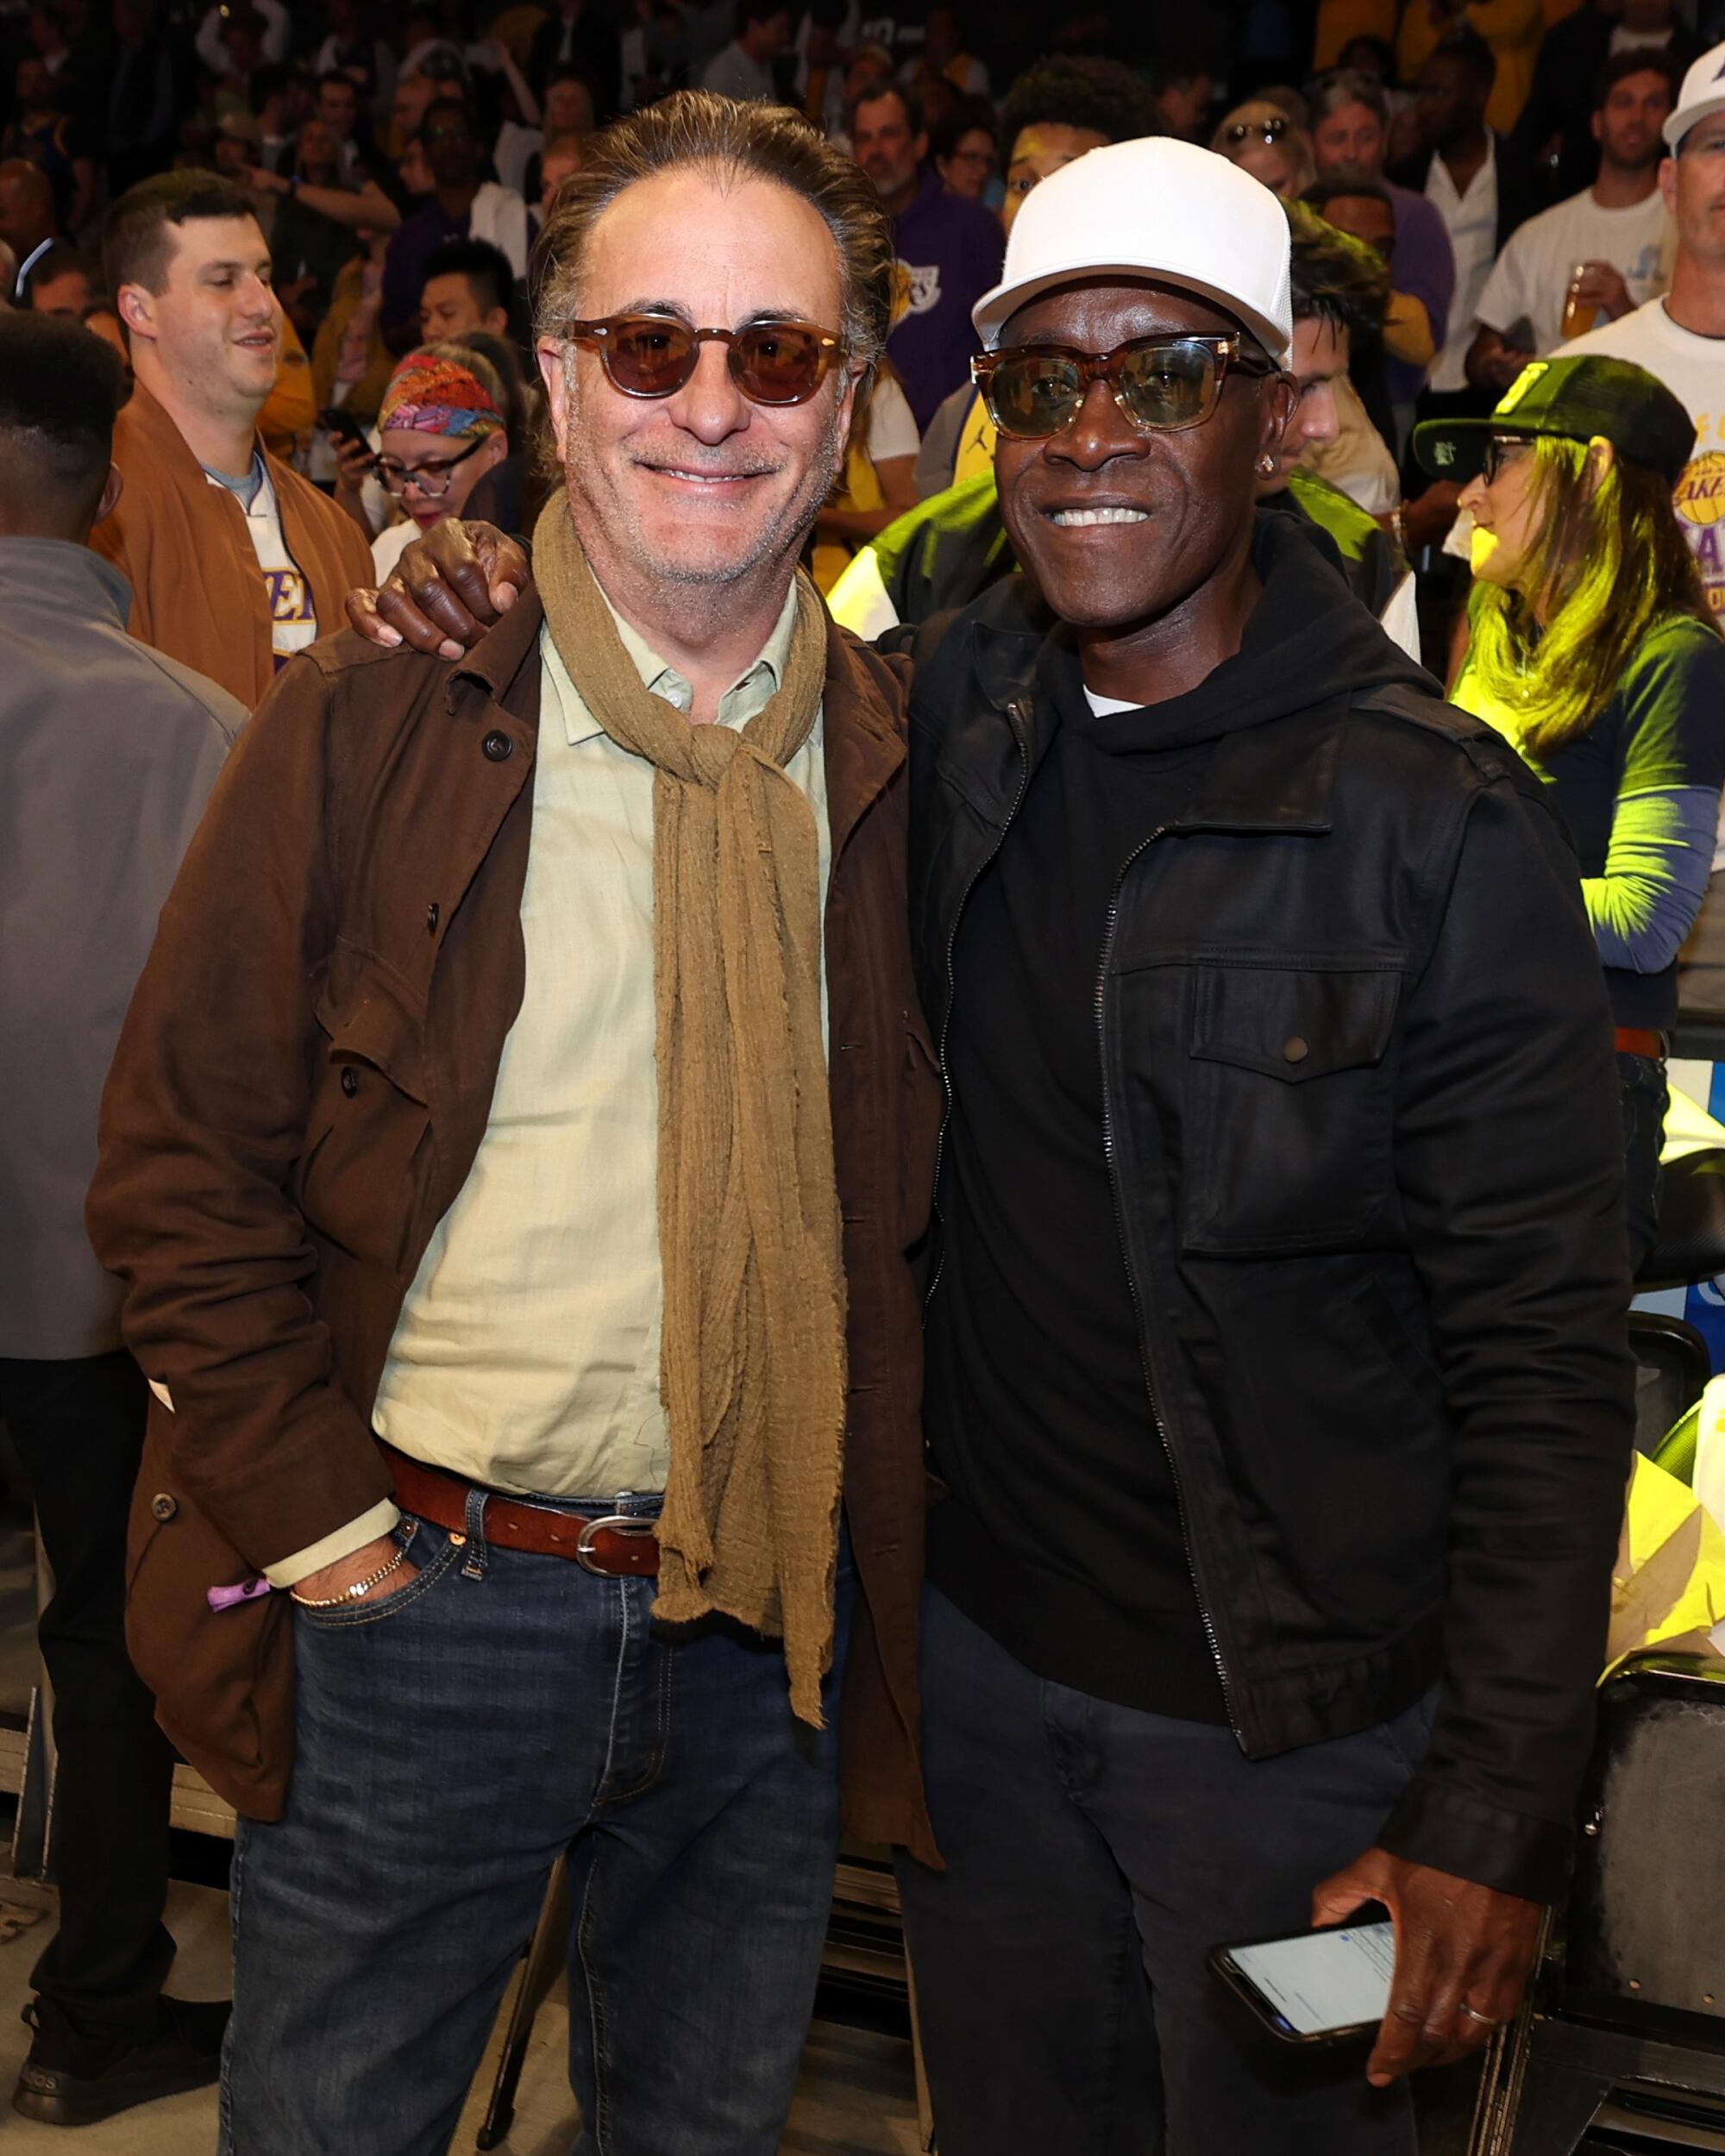 Actors Andy Garcia and Don Cheadle poses for a photo during Game 3 of the Western Conference Semi-Finals.